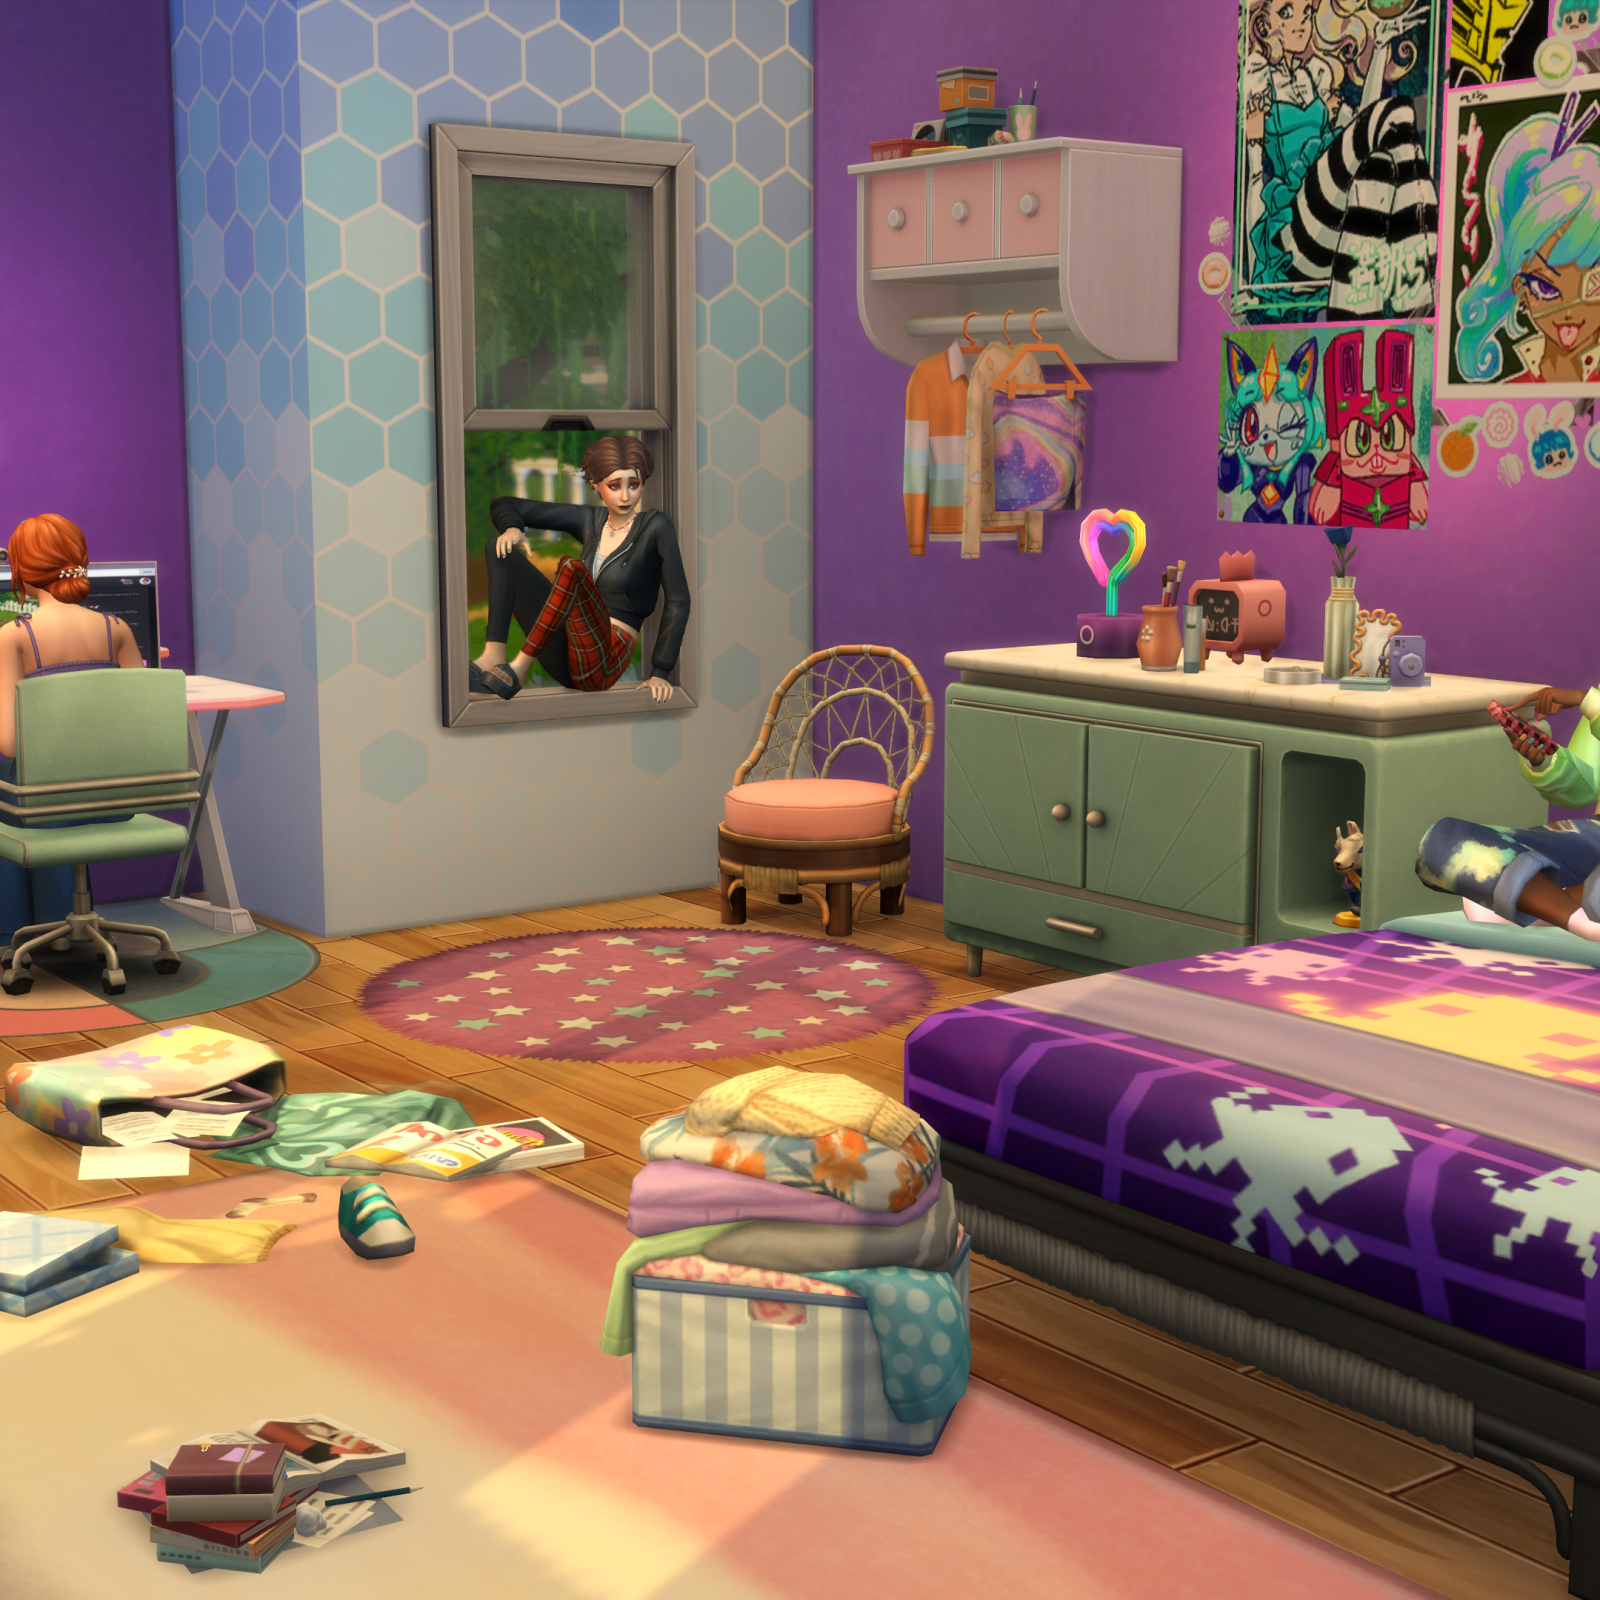 The Sims on X: Get The Sims 4 + Dine Out + Kids Room stuff when